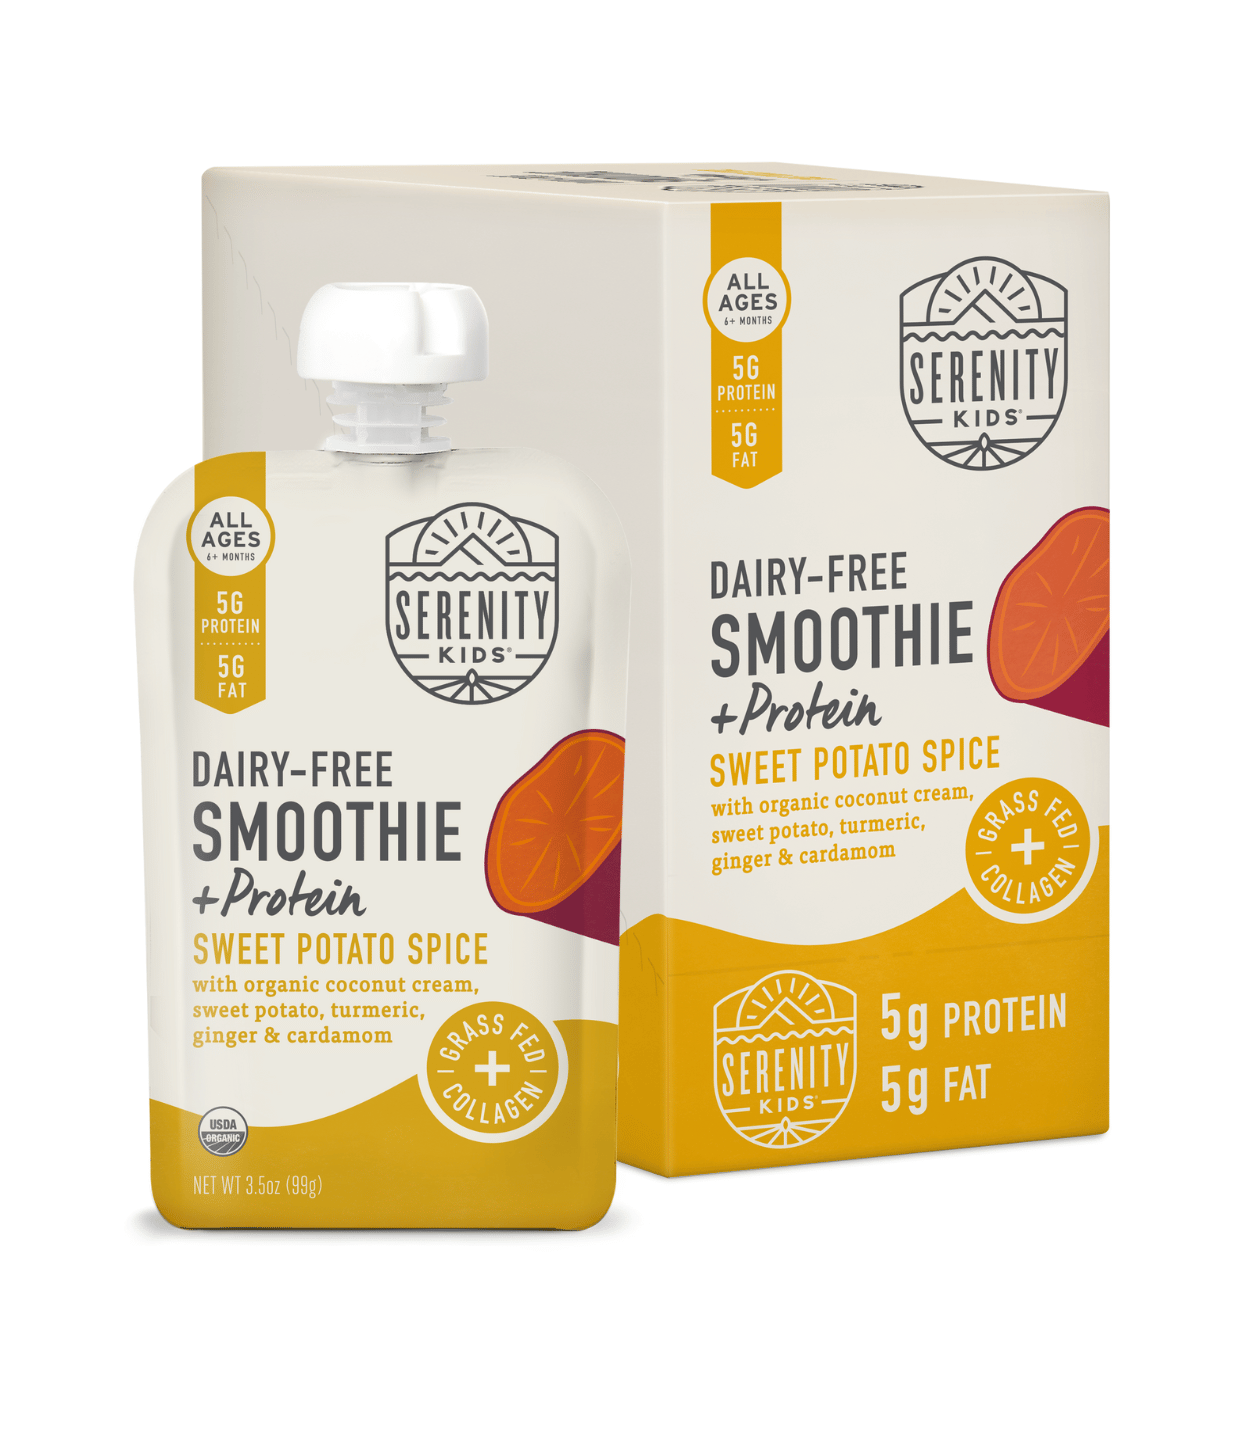 Sweet Potato Spice Dairy-Free Smoothie + Protein - Serenity Kids - Pouch With Box